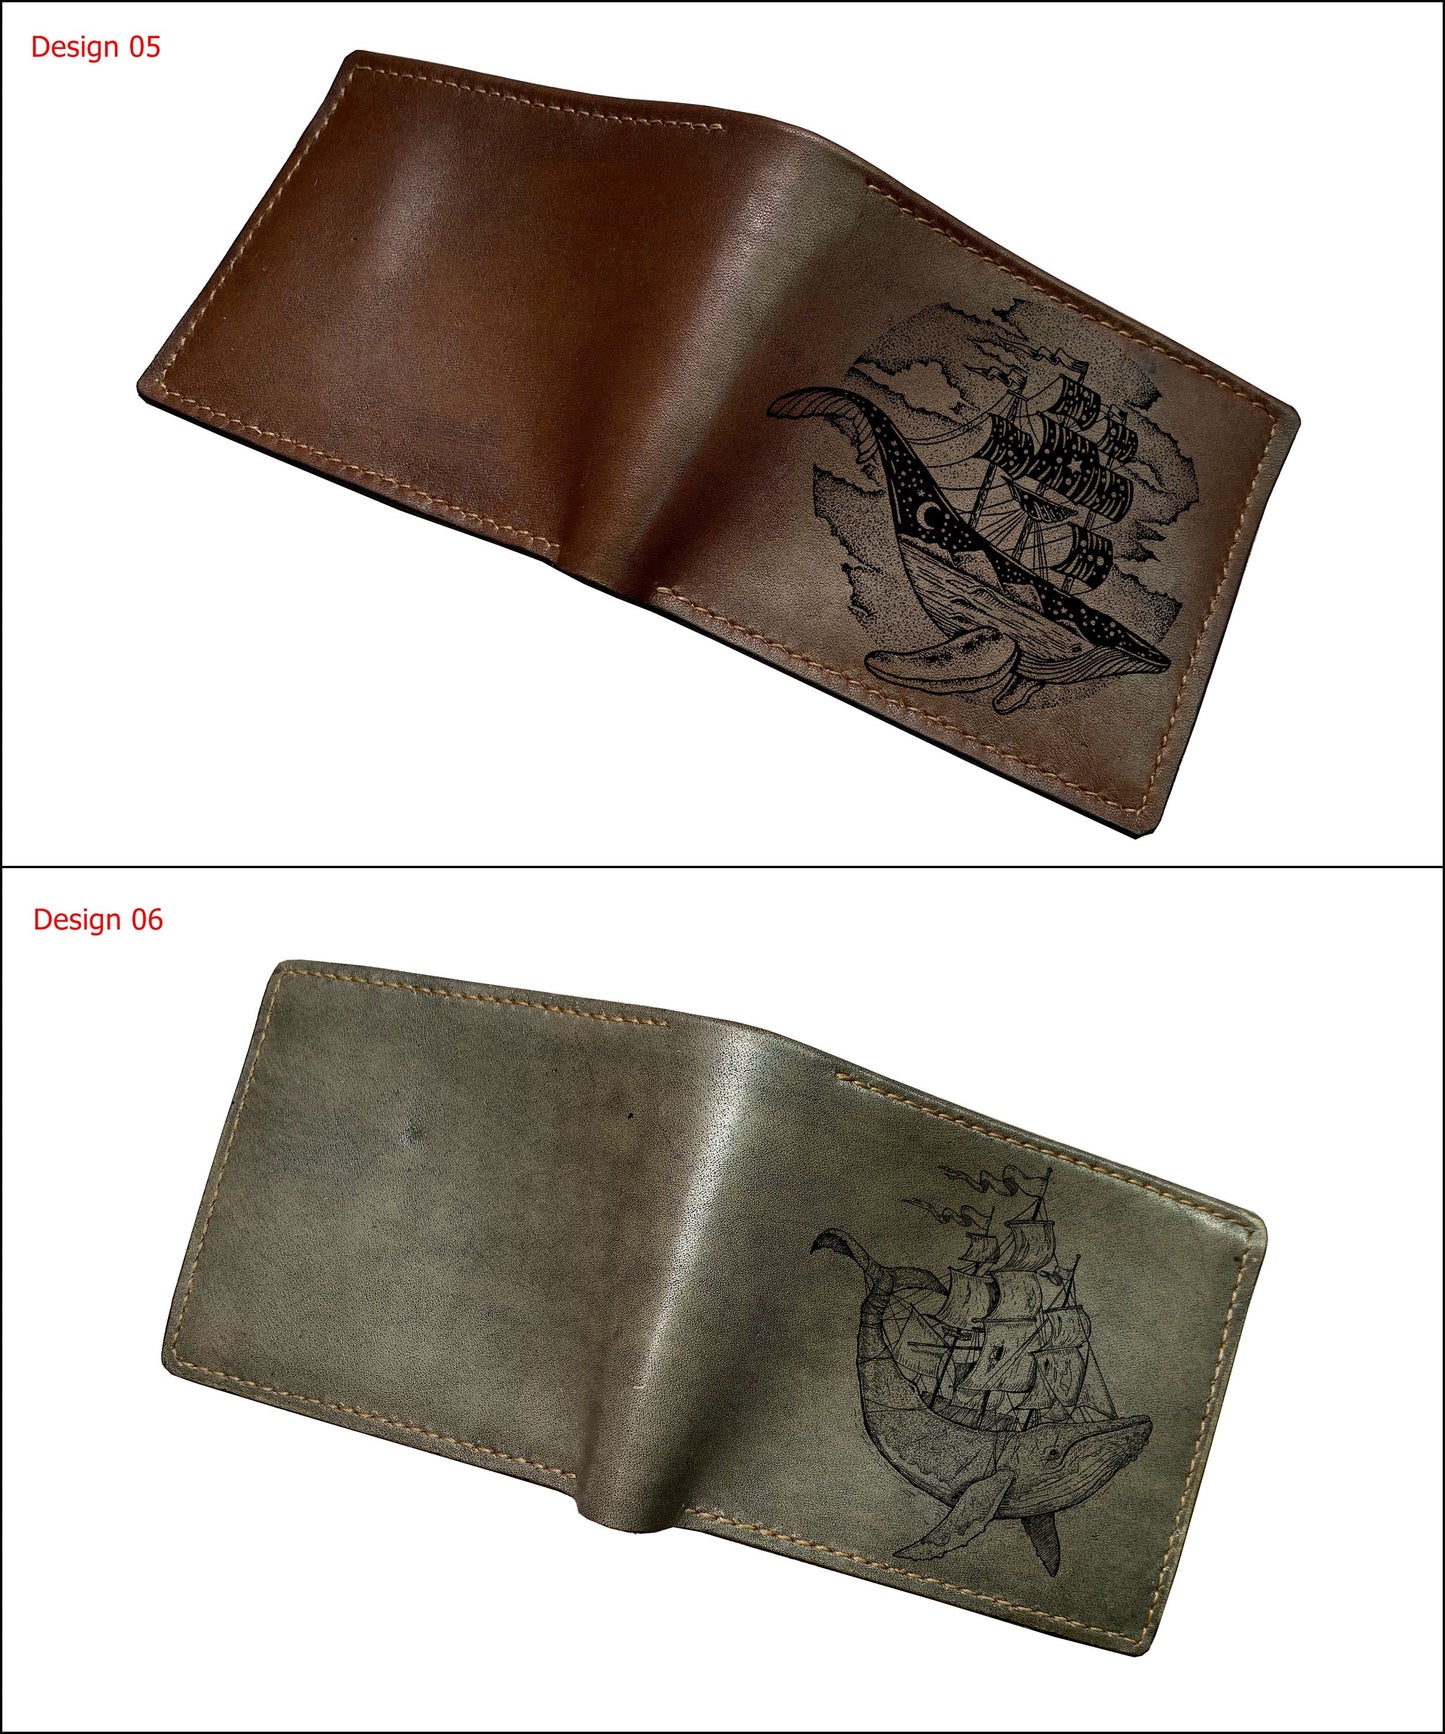 Mayan Corner - Whale geometric leather wallet, animal art wallet, customized gift for him